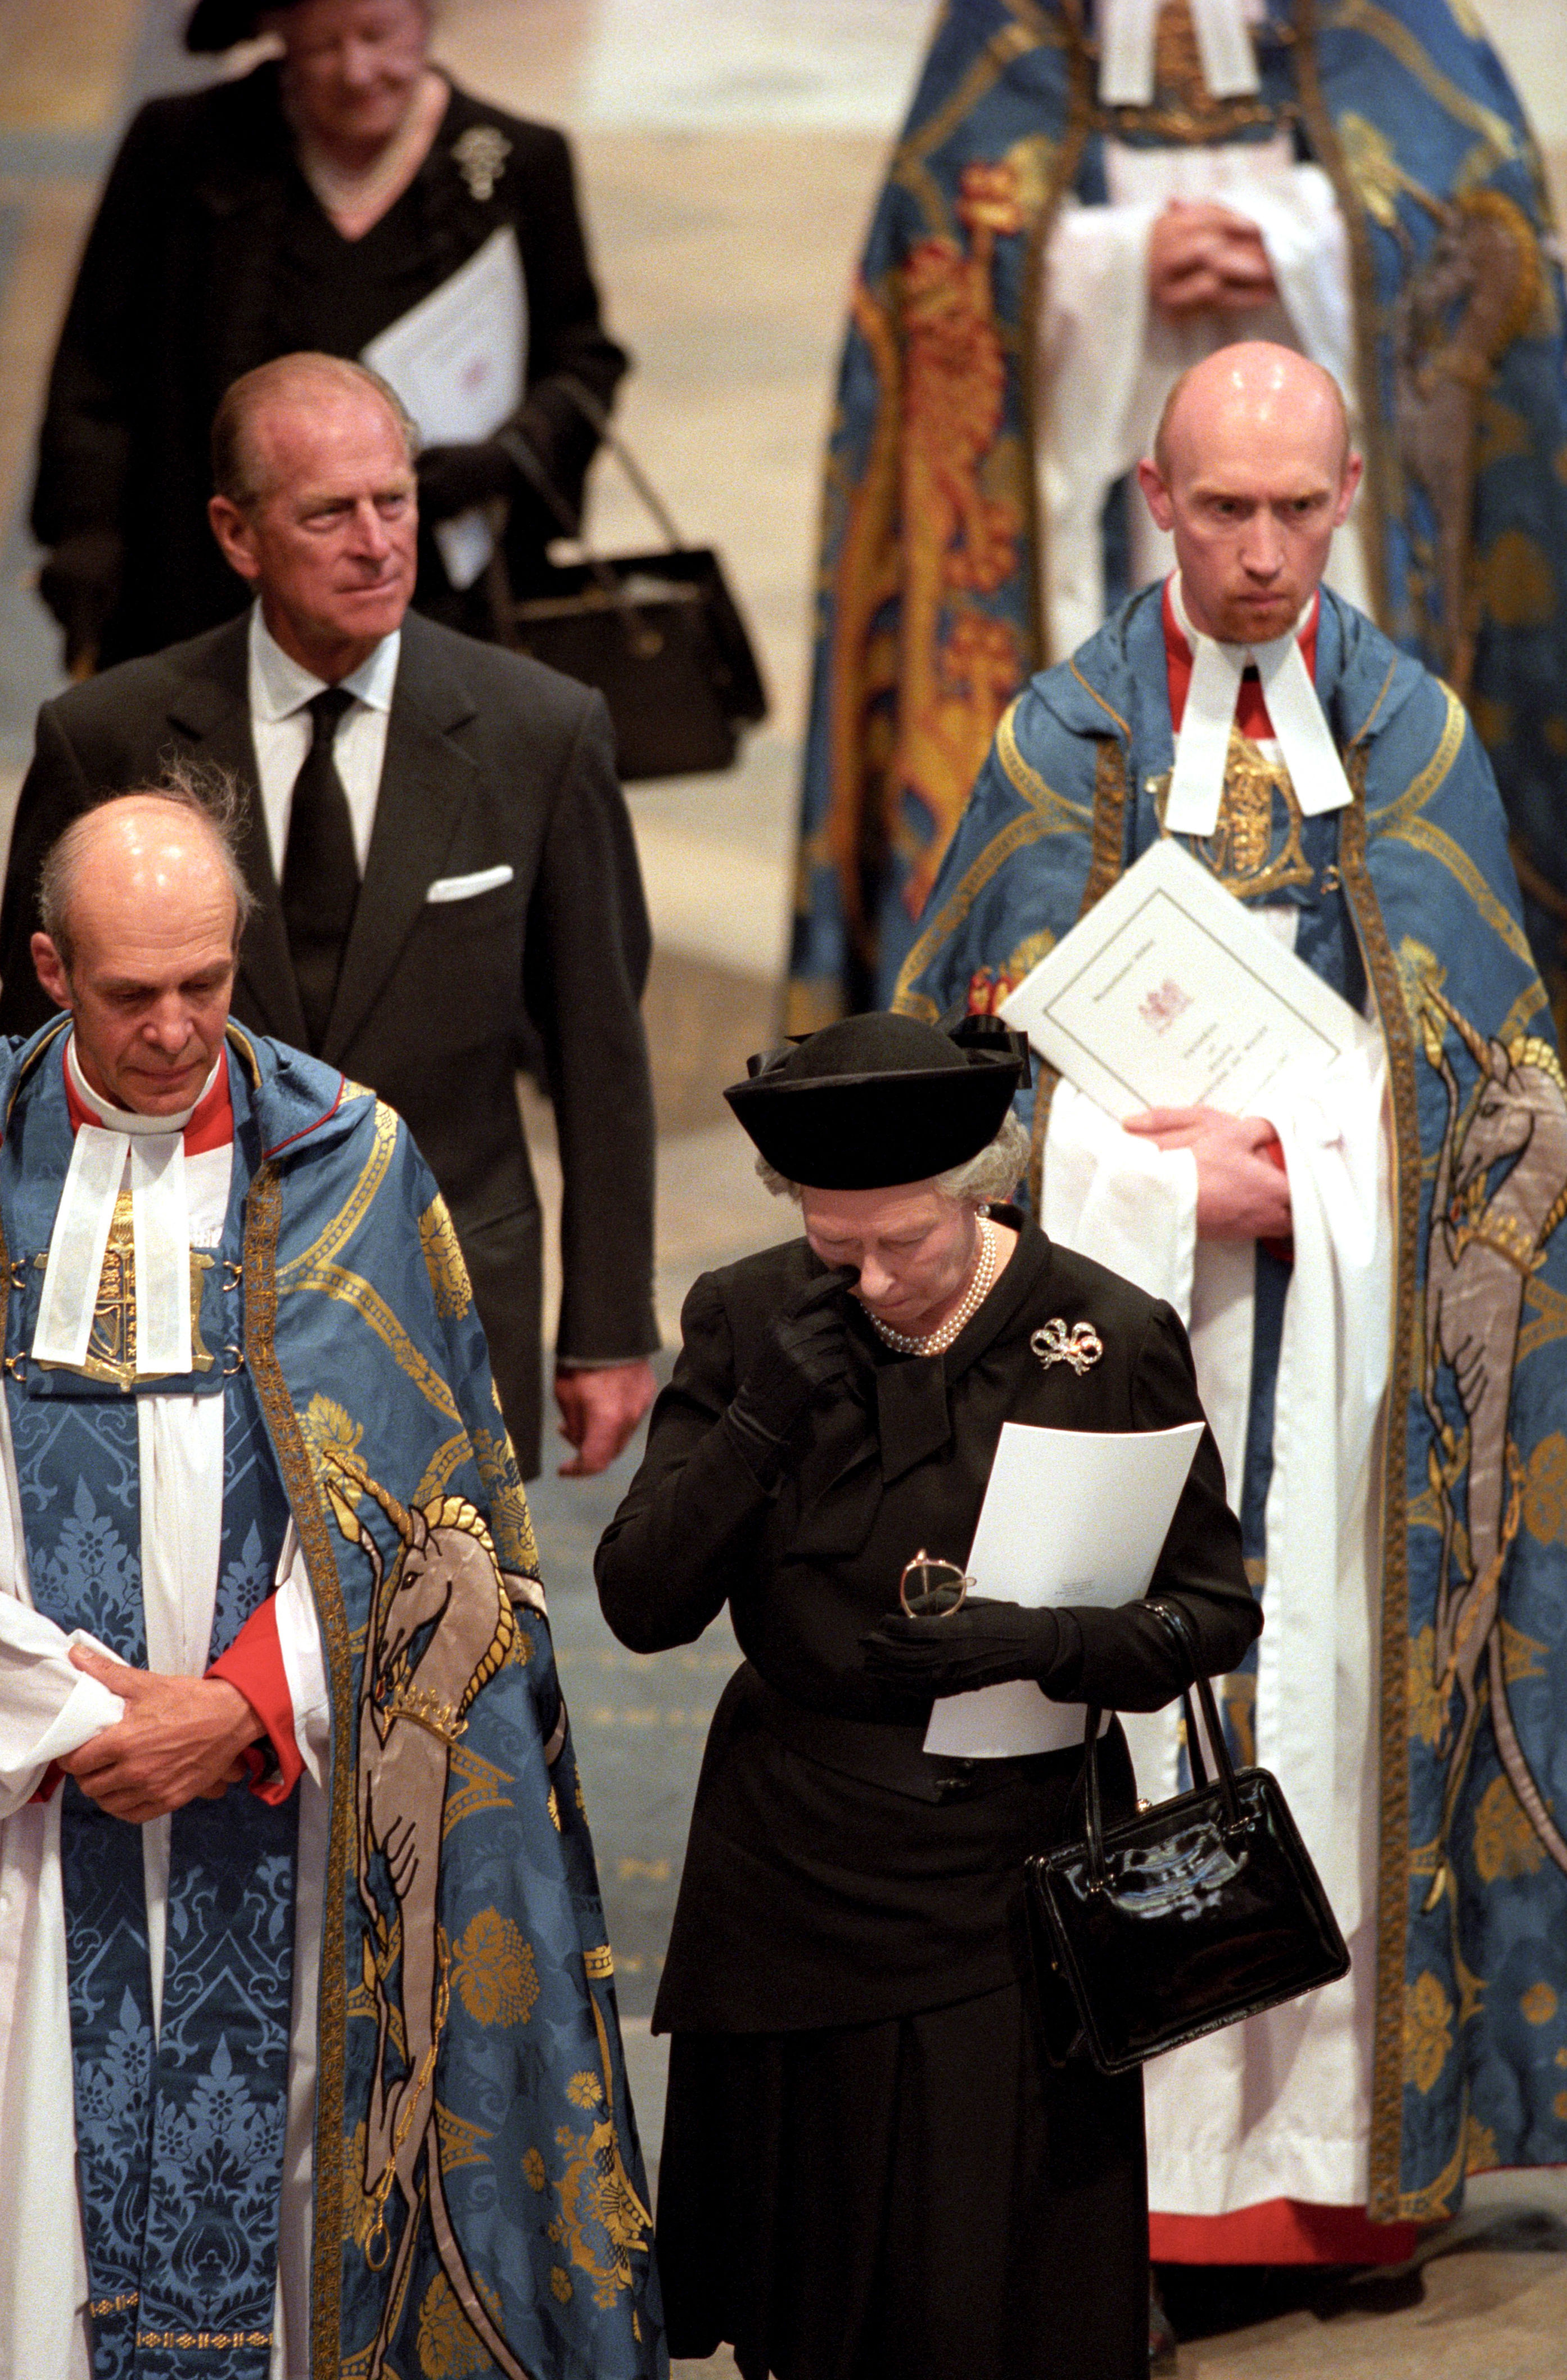 <p>Queen Elizabeth II wiped away a tear as she arrived at Westminster Abbey in London with senior clergy, Prince Philip and Queen Elizabeth the Queen Mother for the funeral of Princess Diana on Sept. 6, 1997.</p>